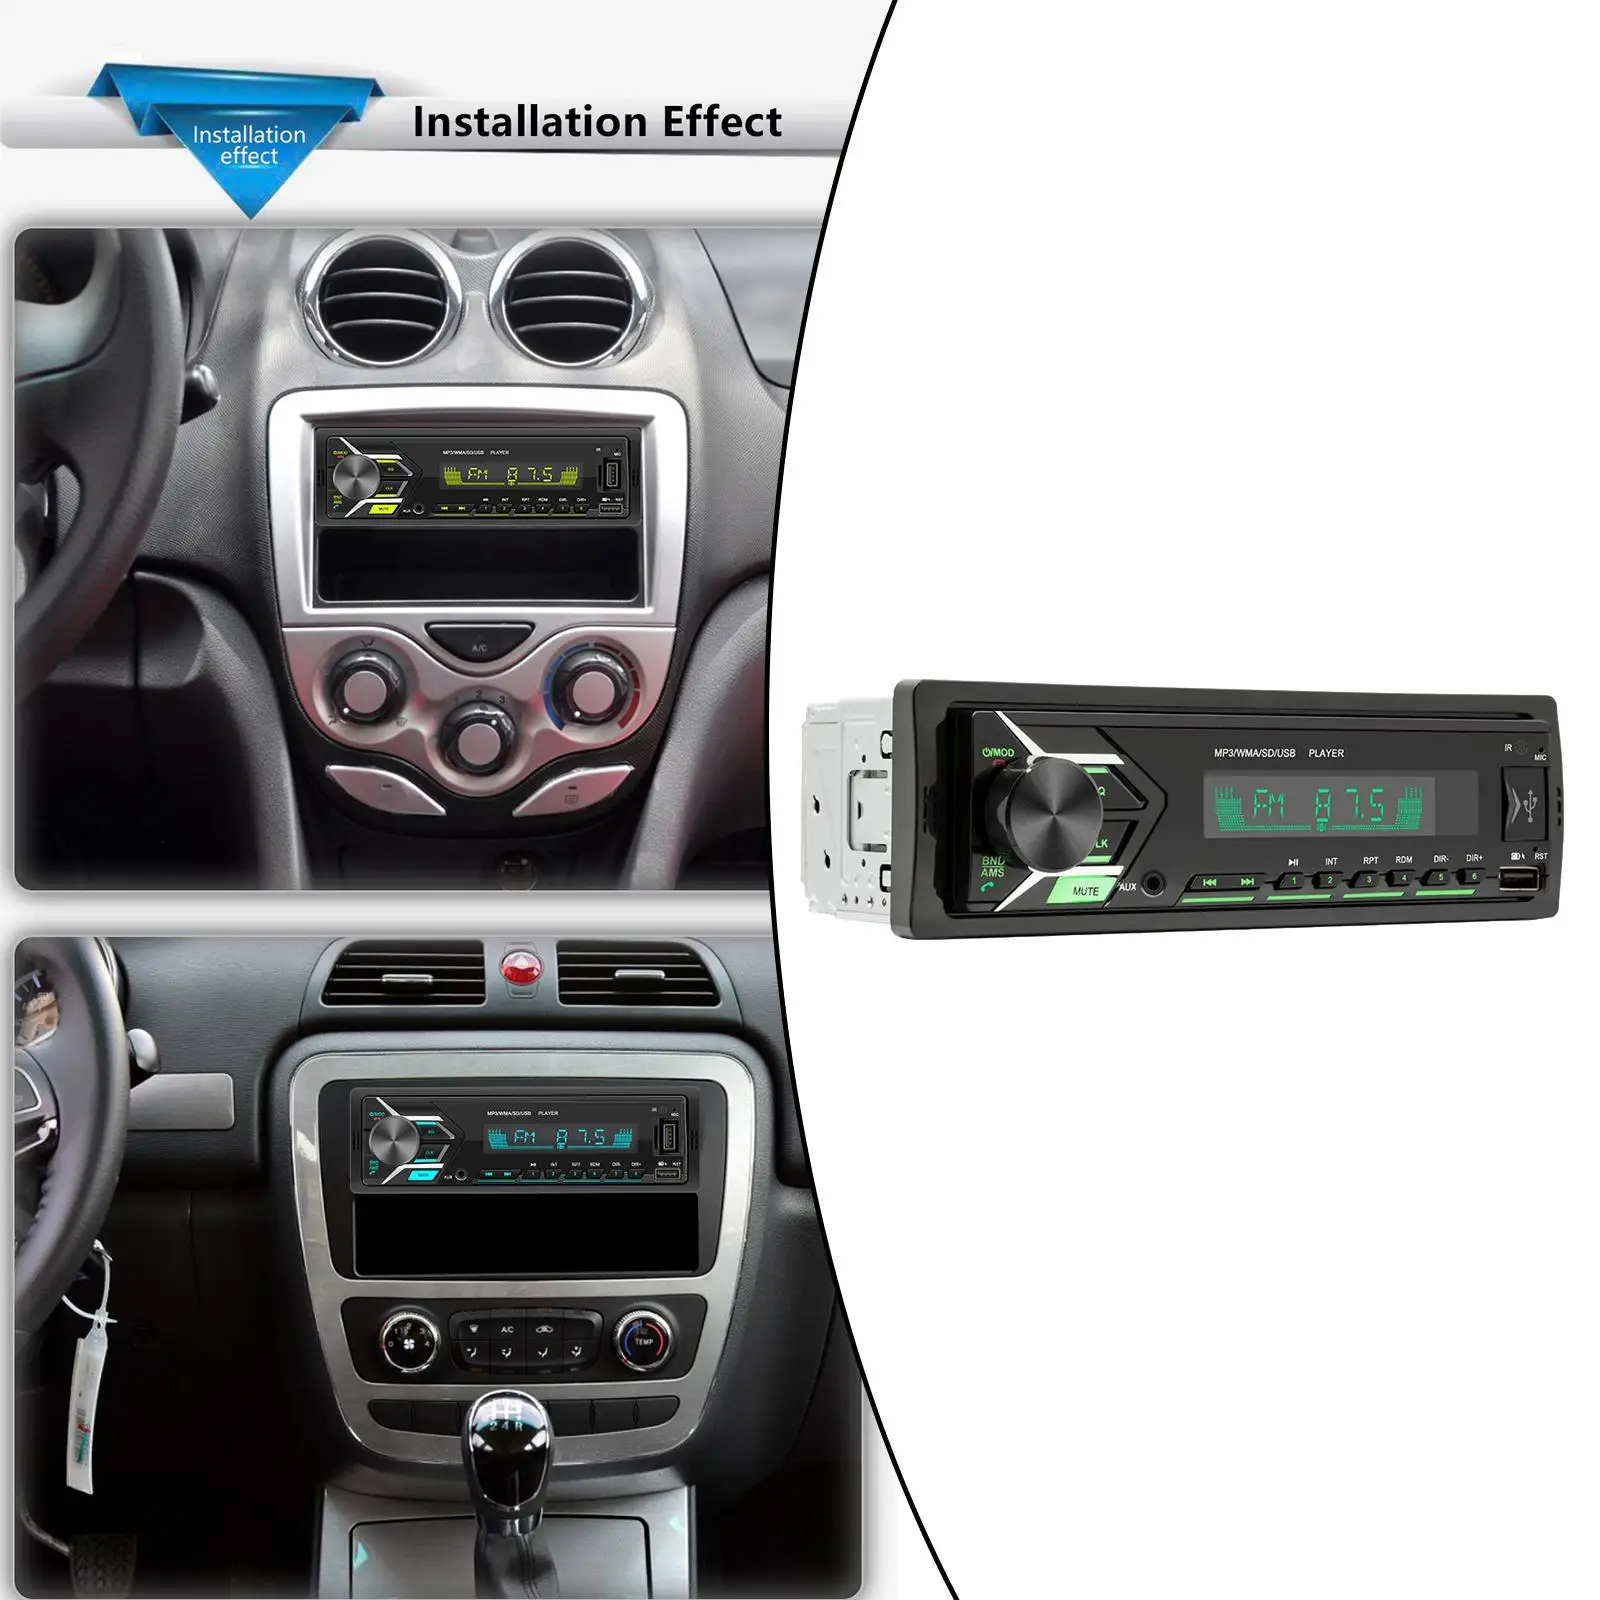  Car Stereo, MP Radio Receiver Hands- Calling Built-in Microph Support CD USB 7 Color